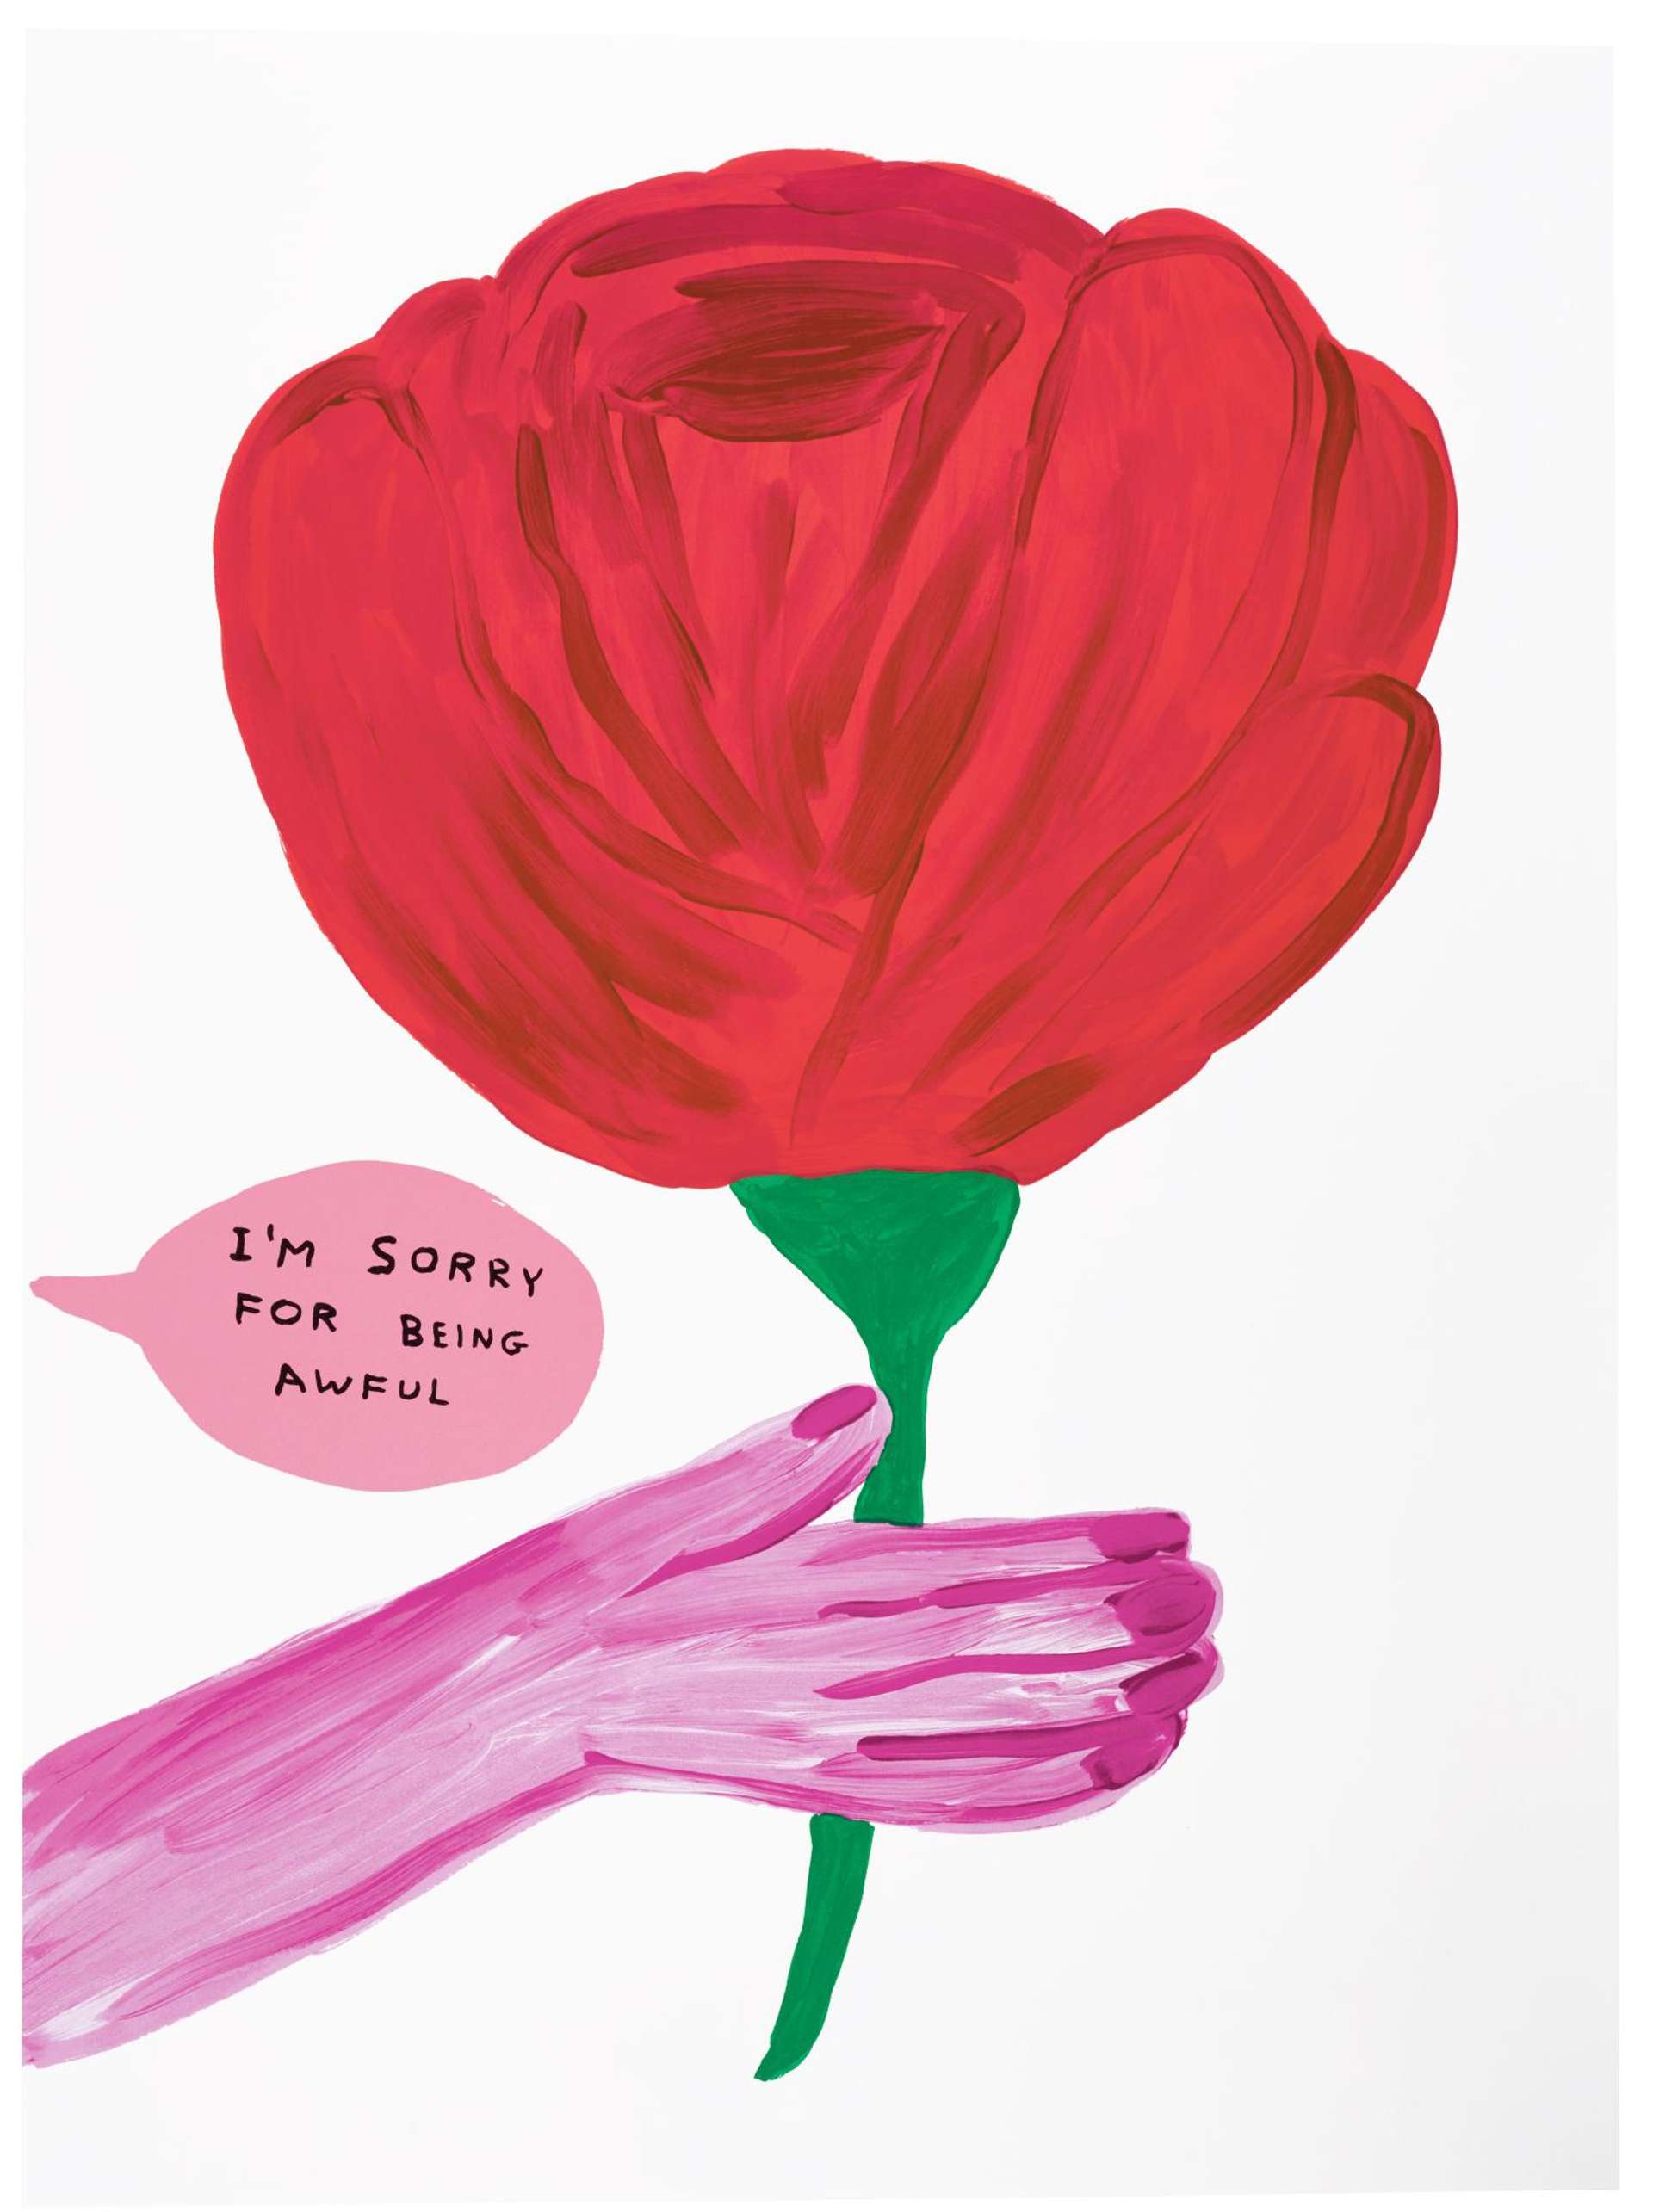 David Shrigley’s I'm Sorry For Being Awful. A screenprint of a pink hand holding a red flower next to the textt "I'm sorry for being awful"